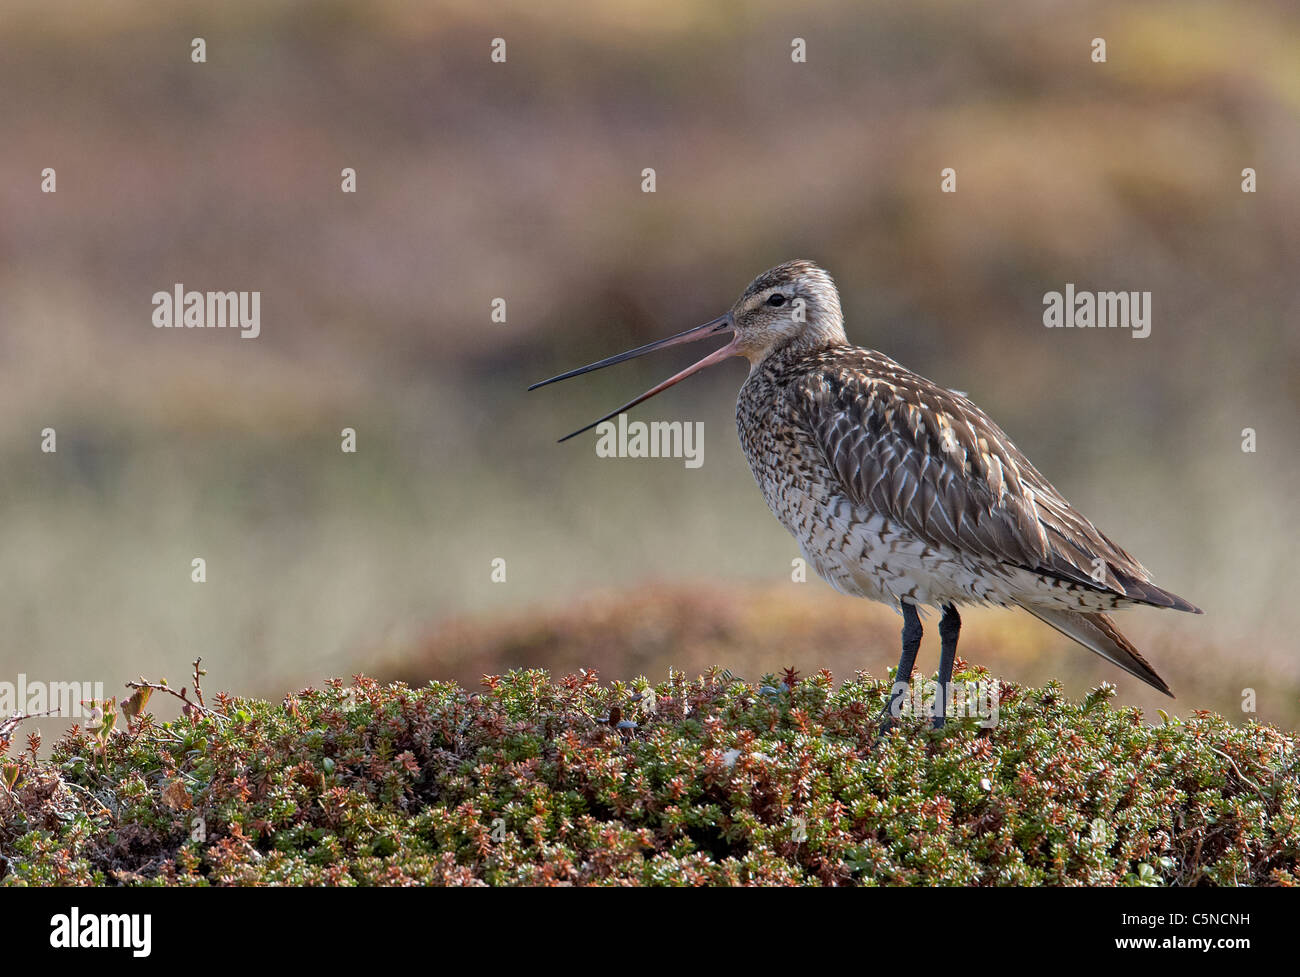 Bar-tailed Godwit (Limosa lapponica). Adult female standing on tundra vegetation while calling. Stock Photo